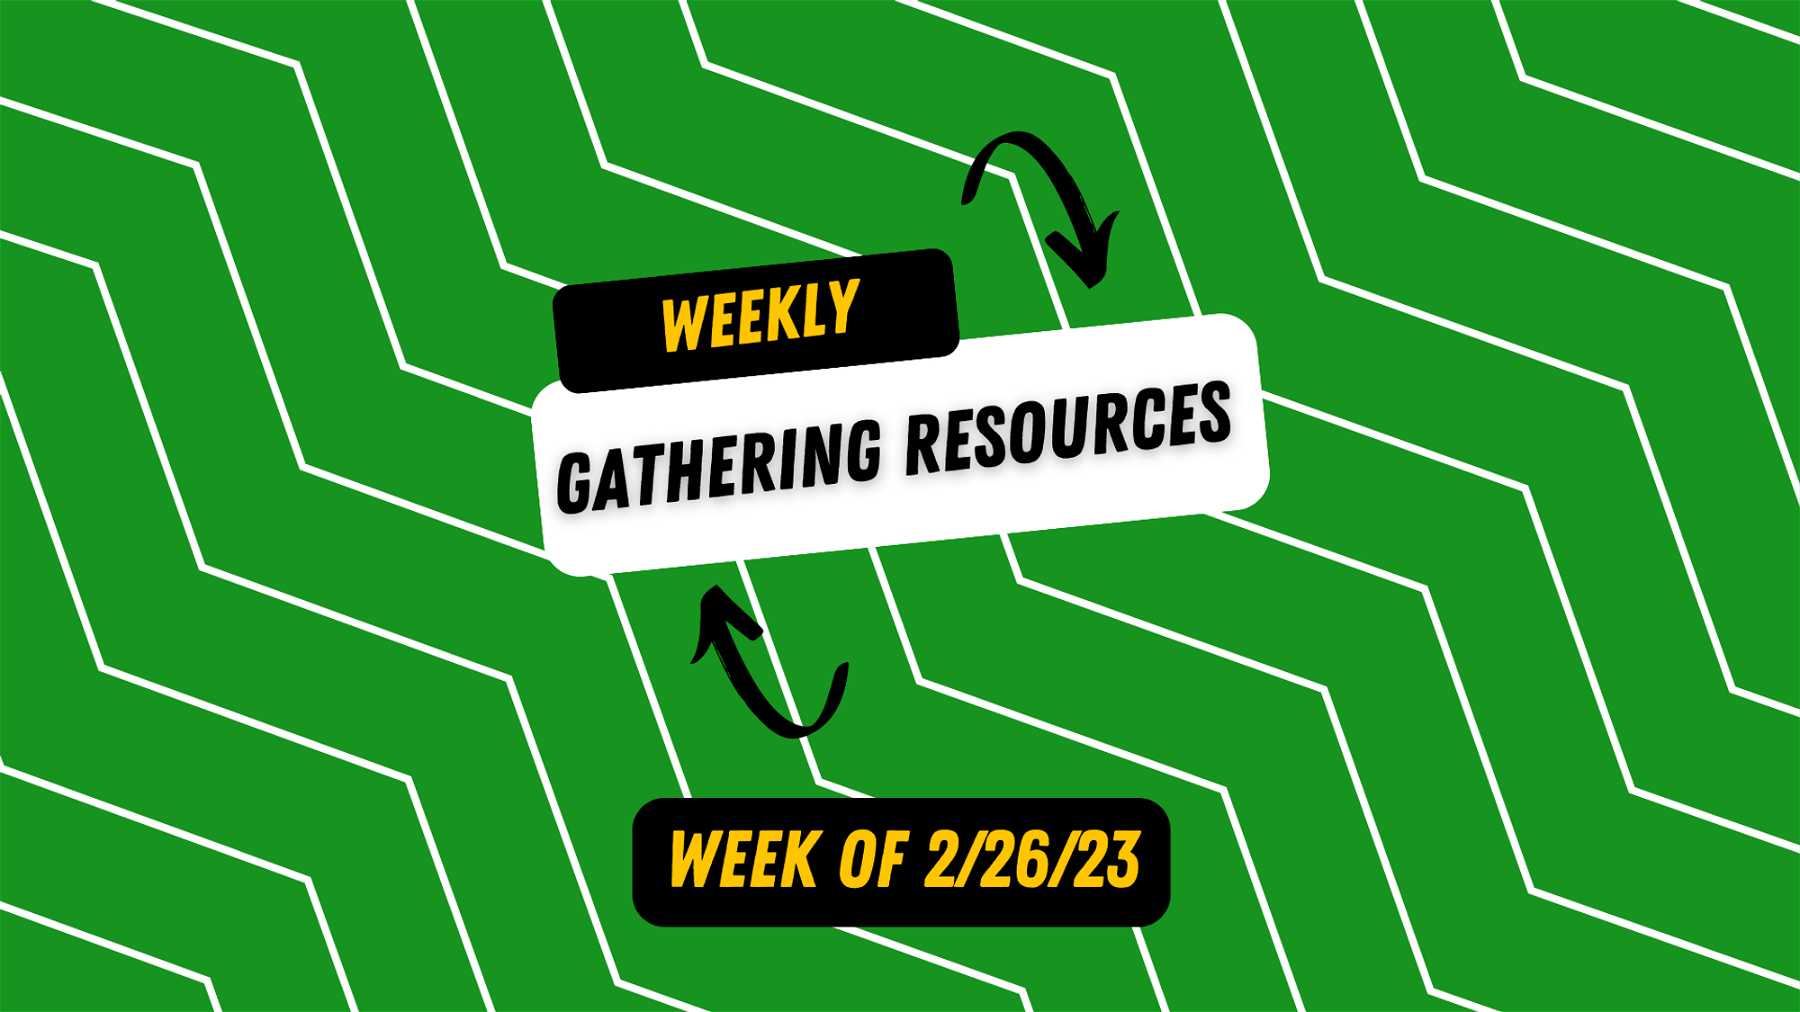 Weekly Gathering Resources for 2/26/23